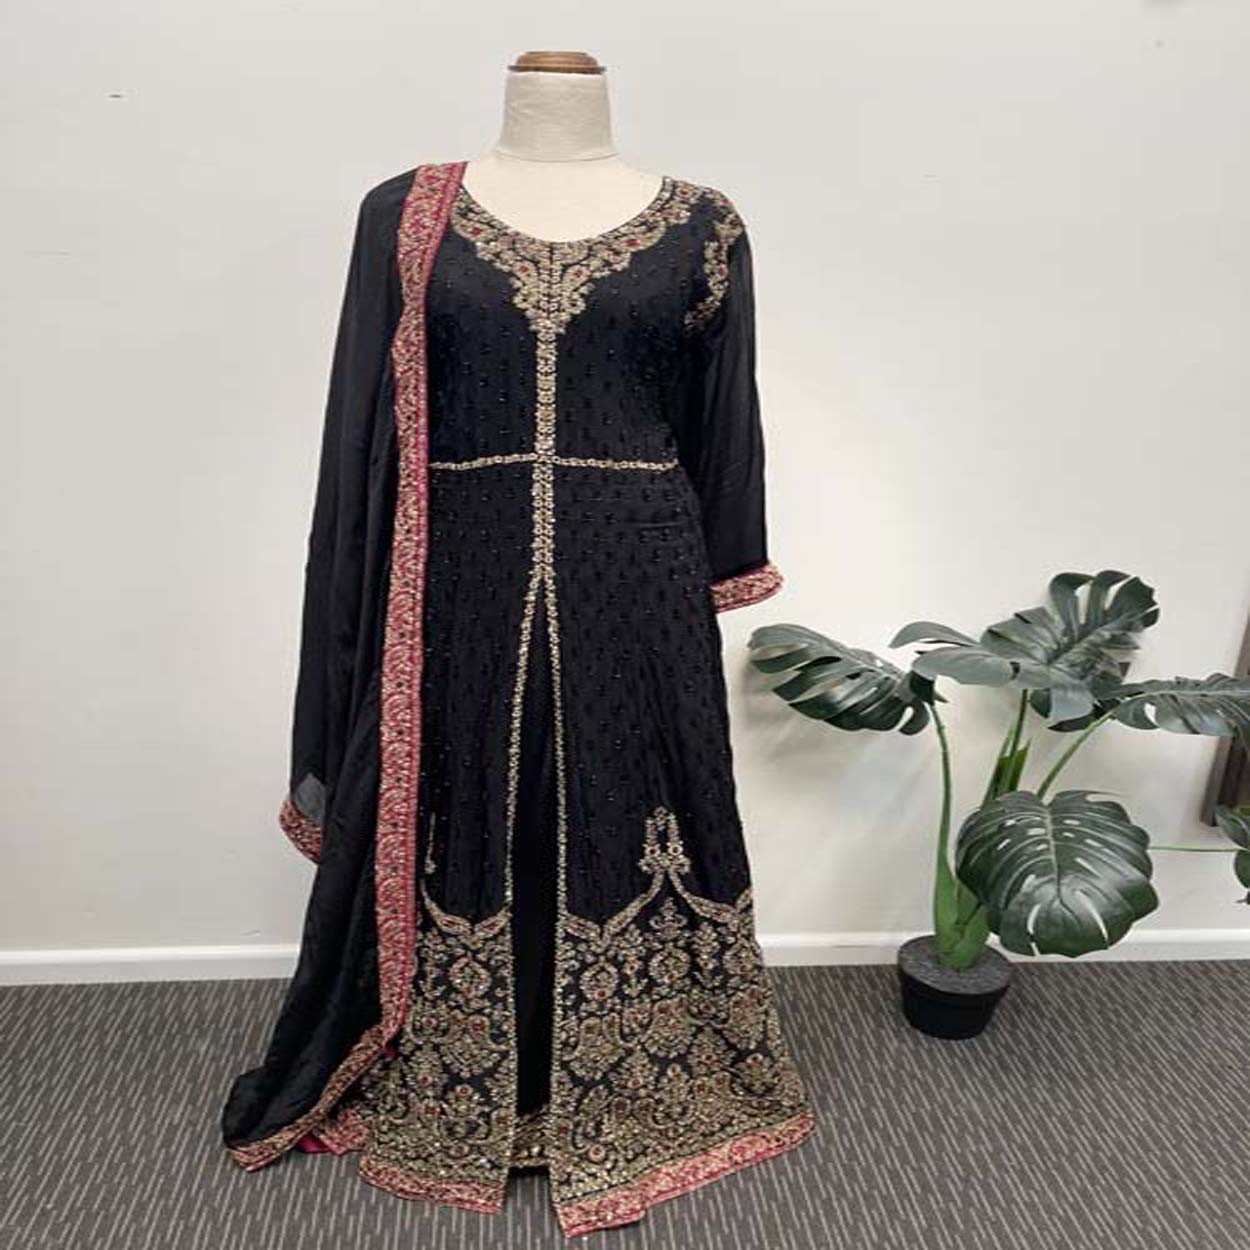 ANARKALI with skirt and chinon dupatta